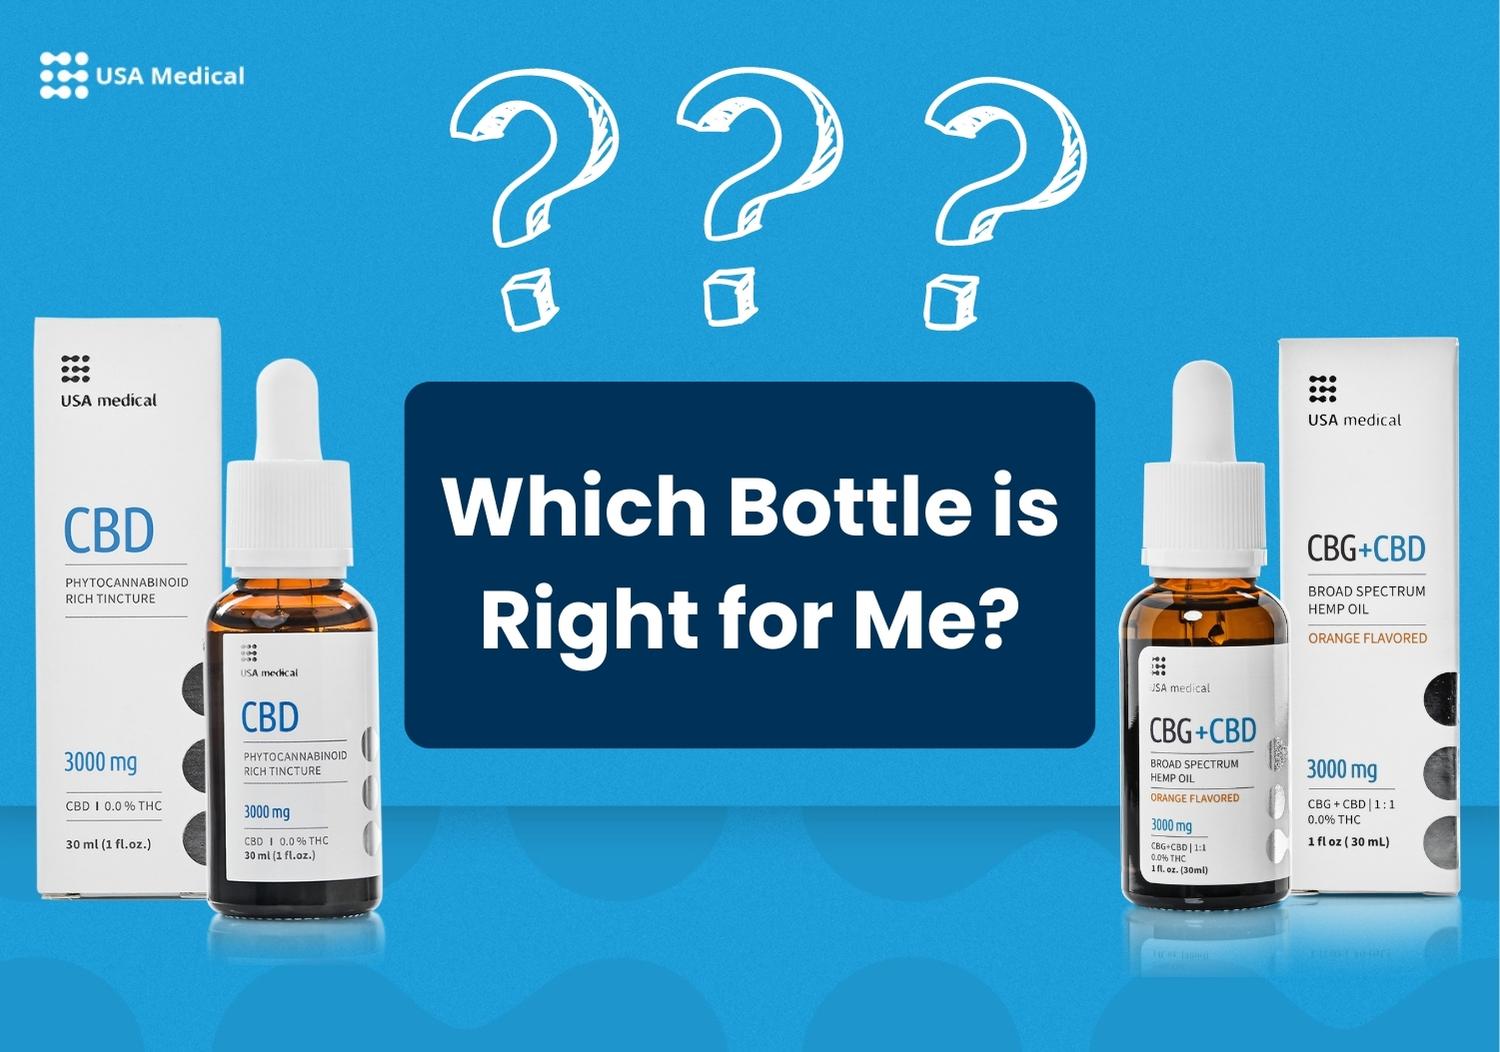 which bottle is right for me?